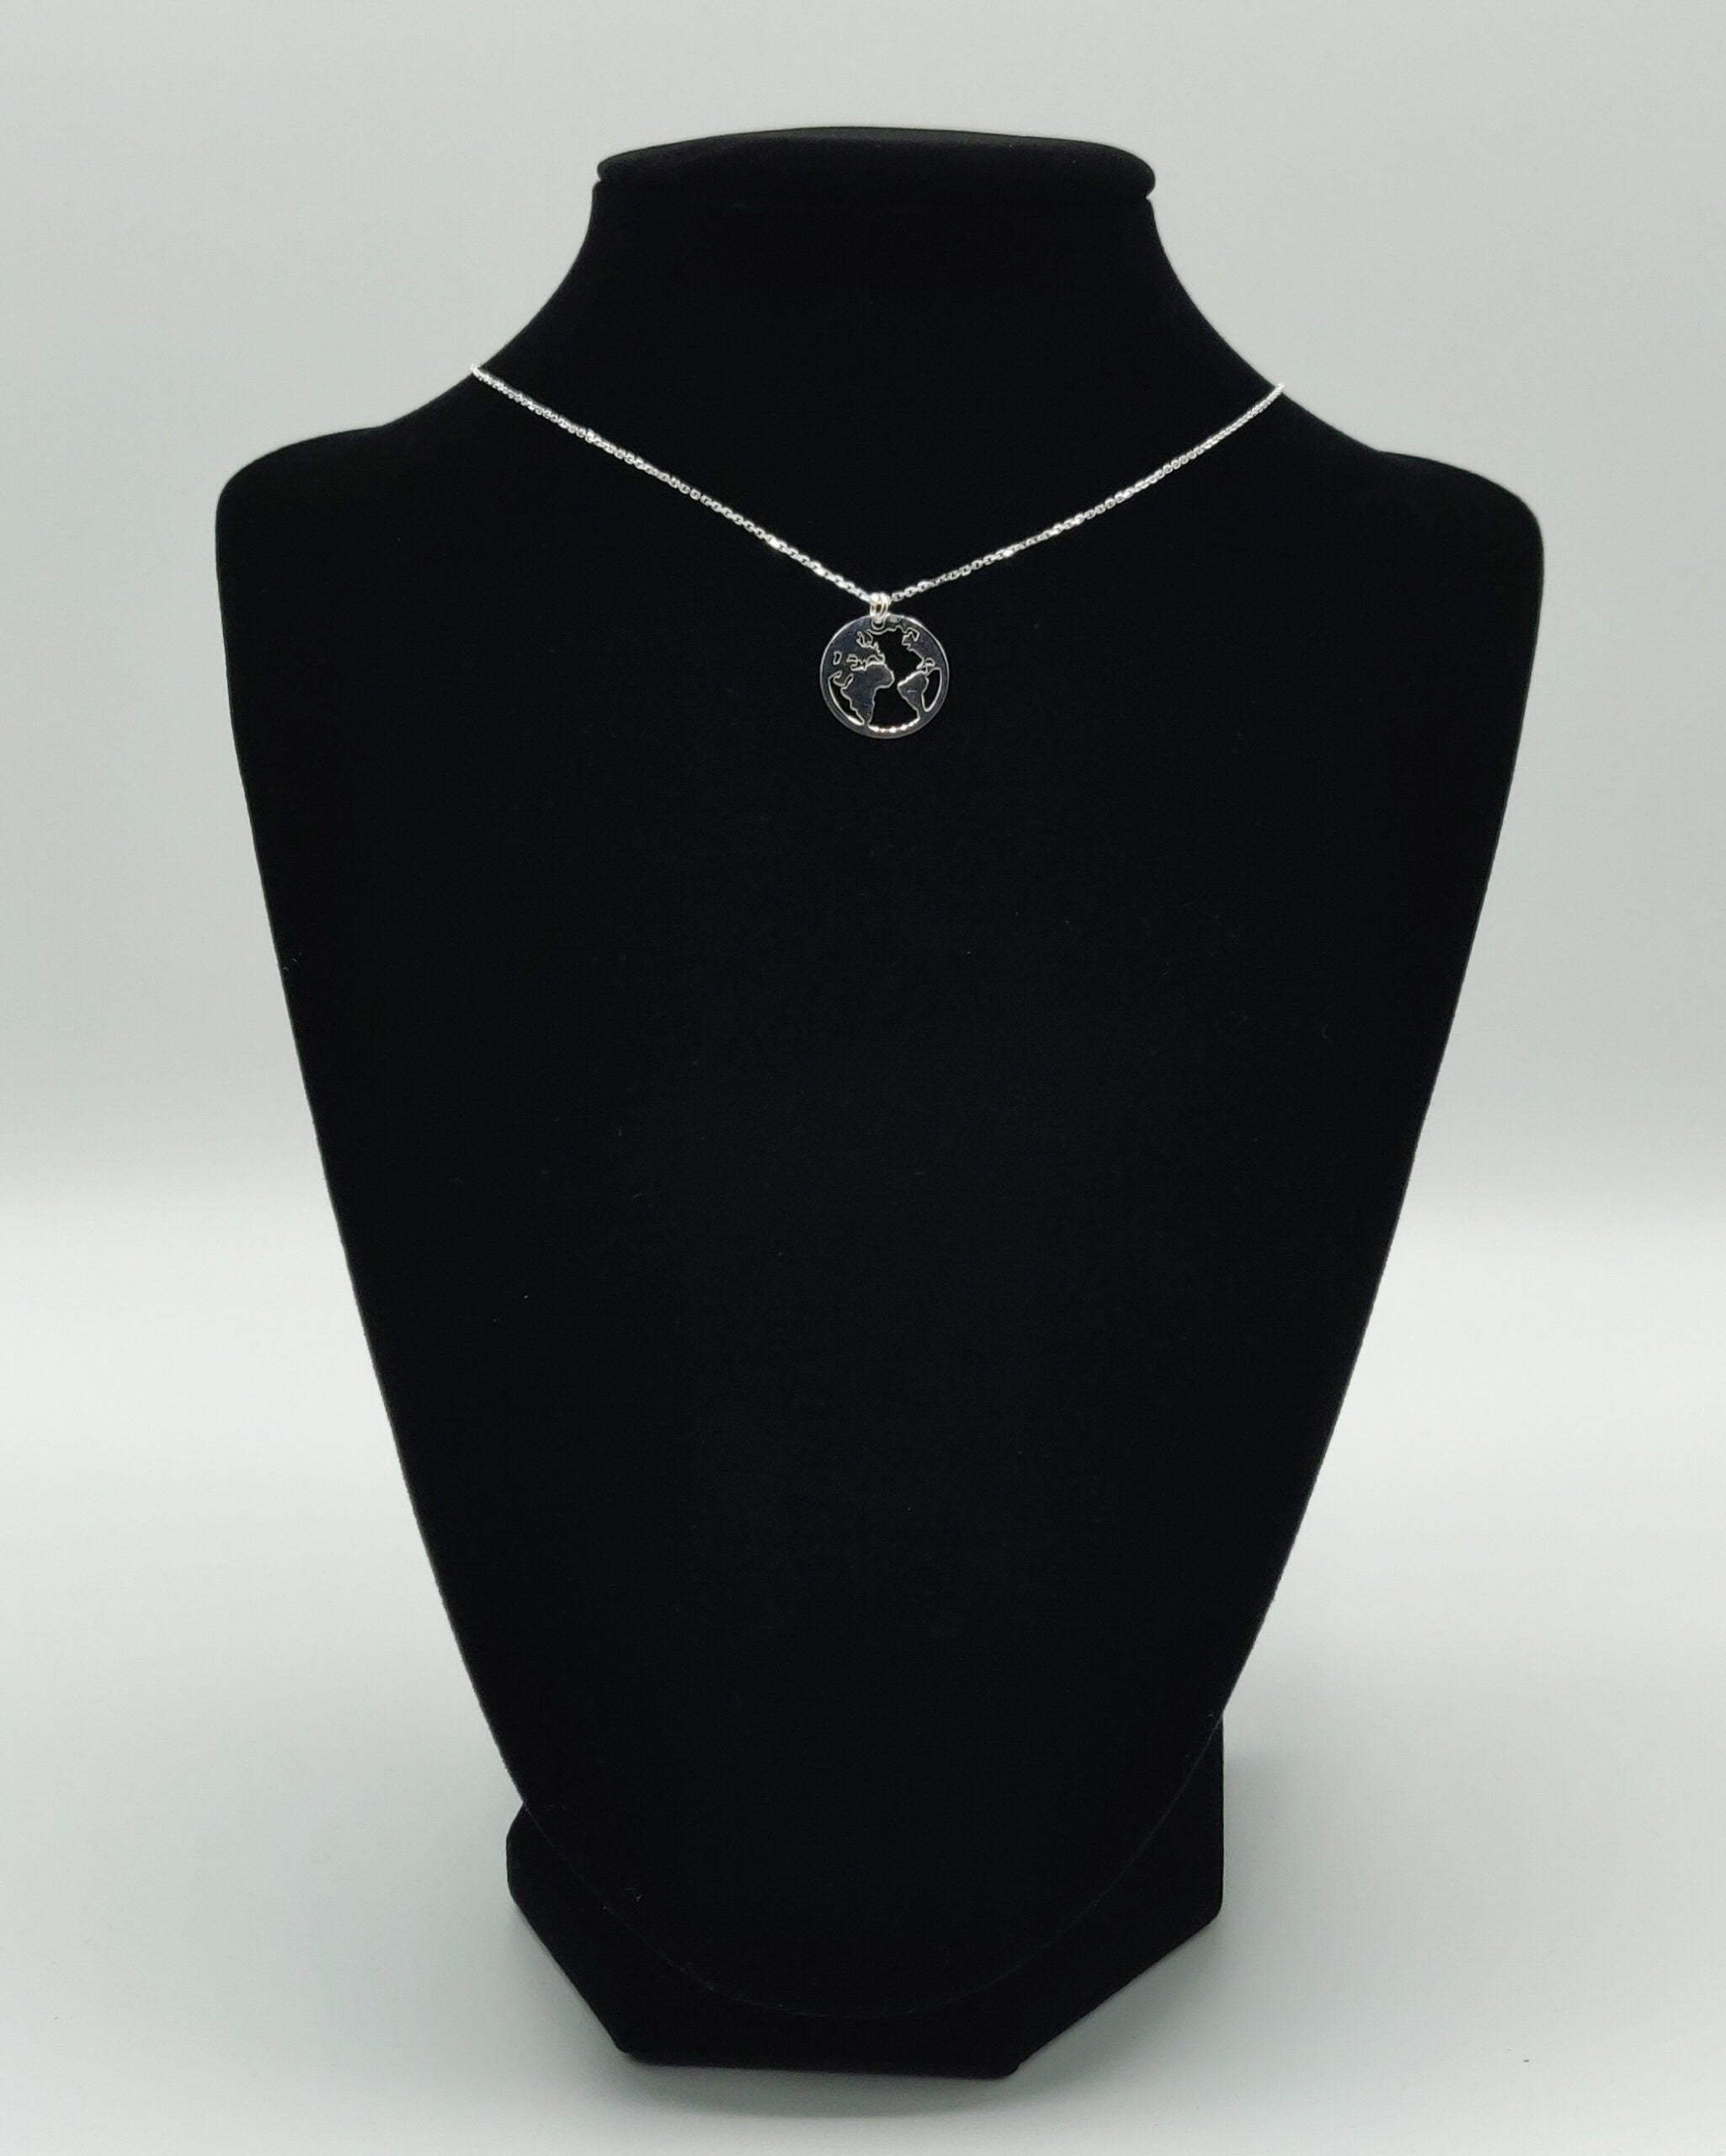 World silver necklace - sterling silver 925